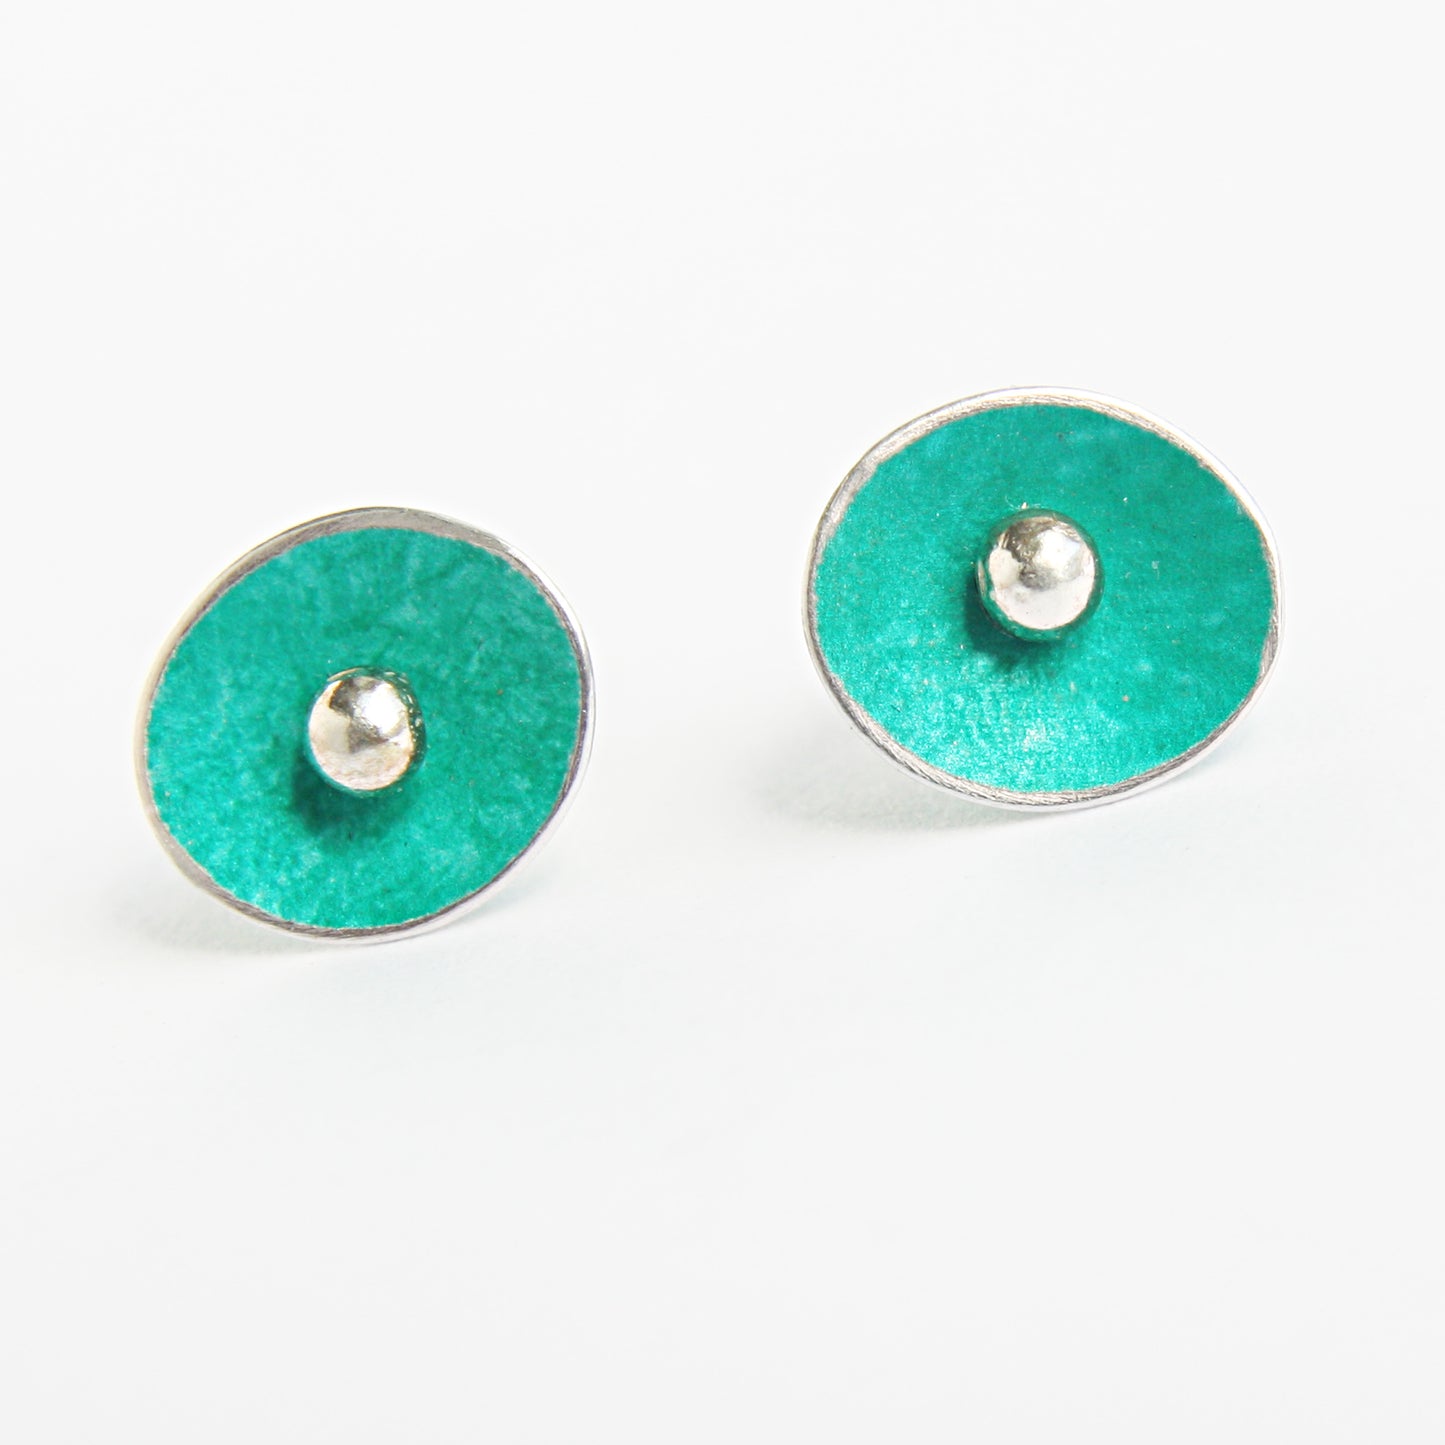 ES1 Small concave oval stud earrings